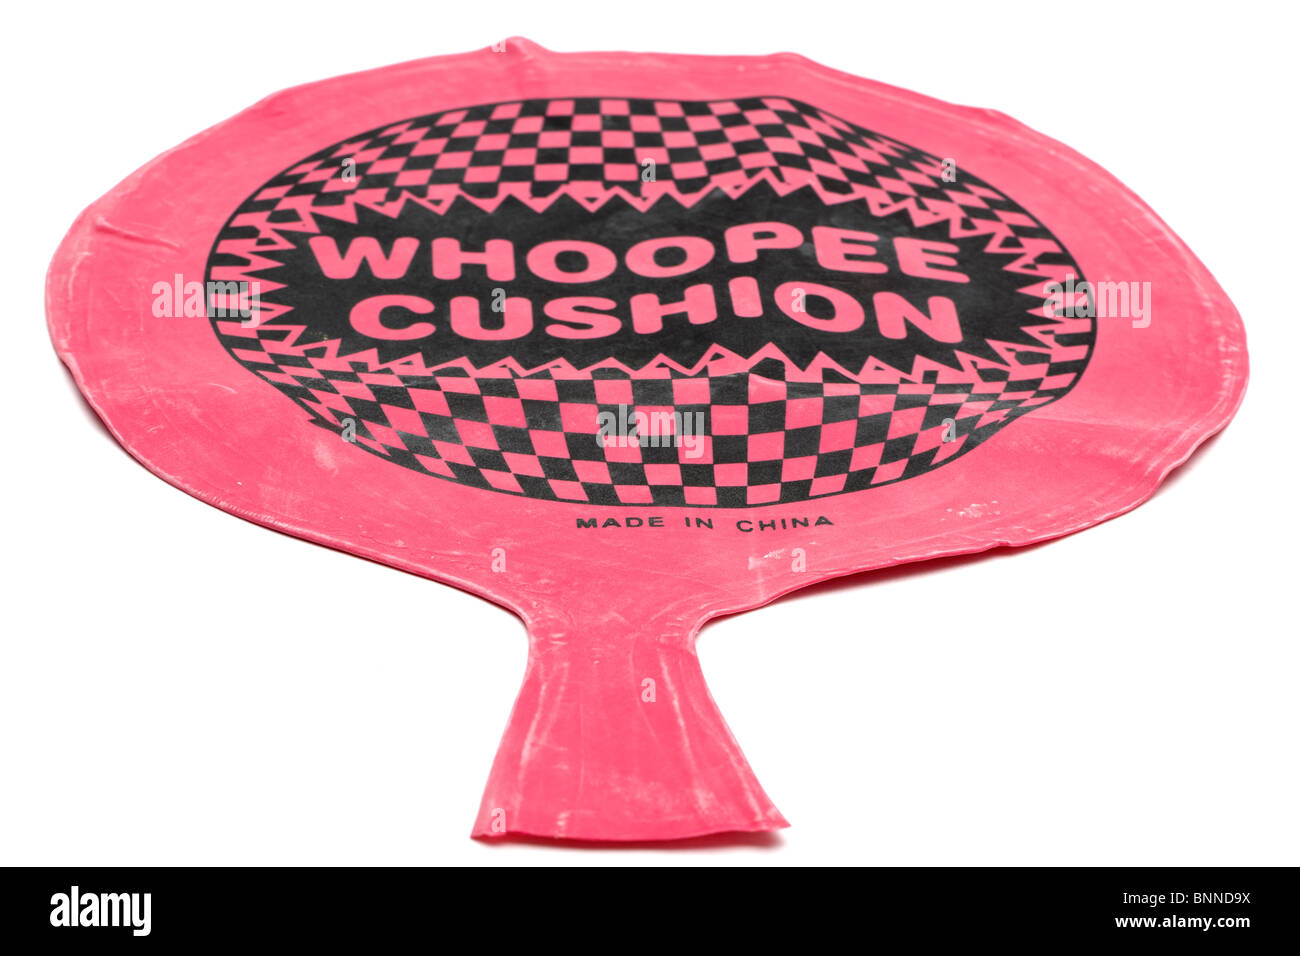 Deflated rubber whoopee cushion made in china Stock Photo